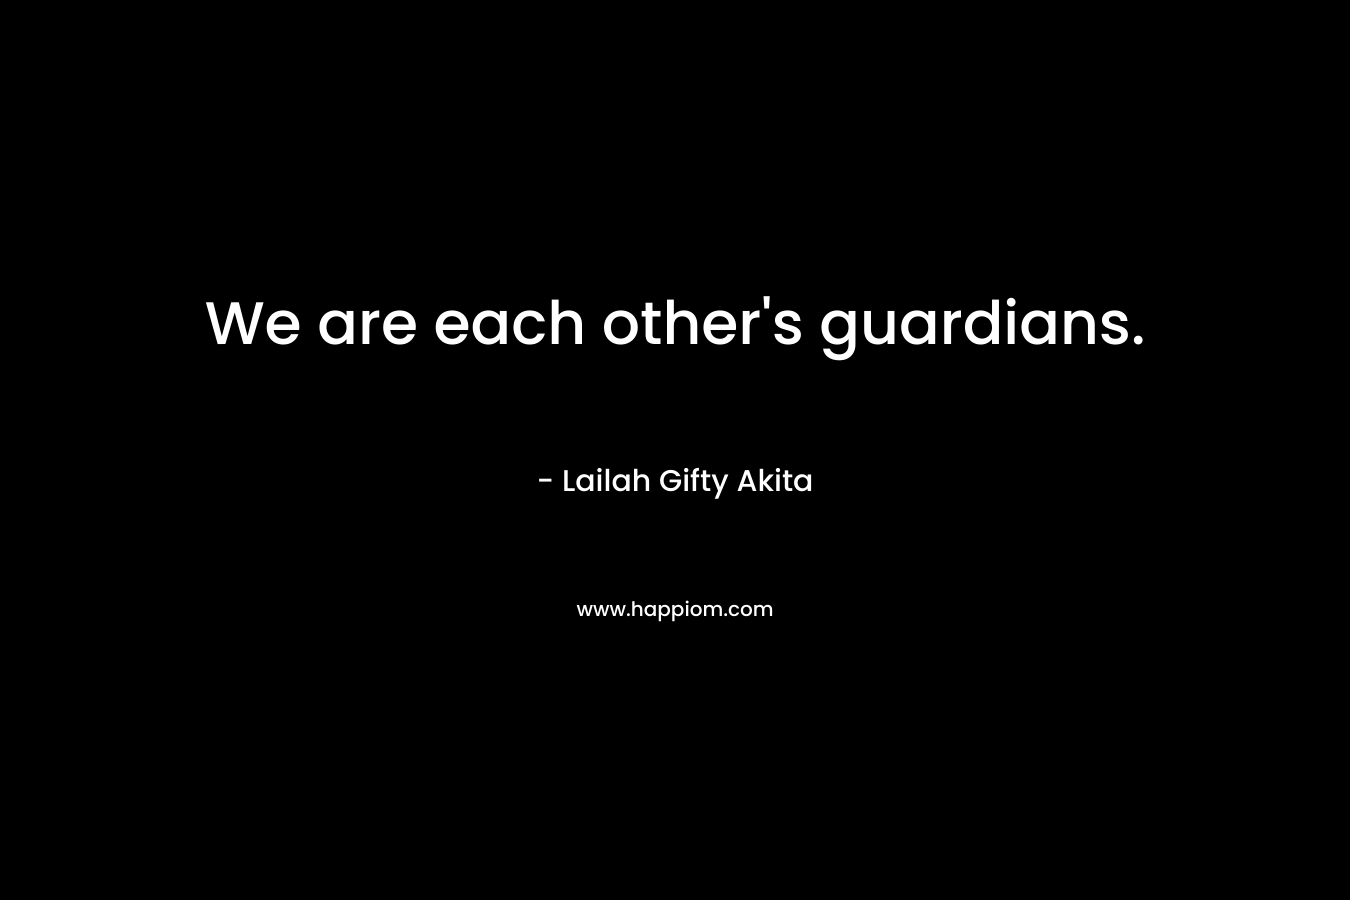 We are each other’s guardians. – Lailah Gifty Akita